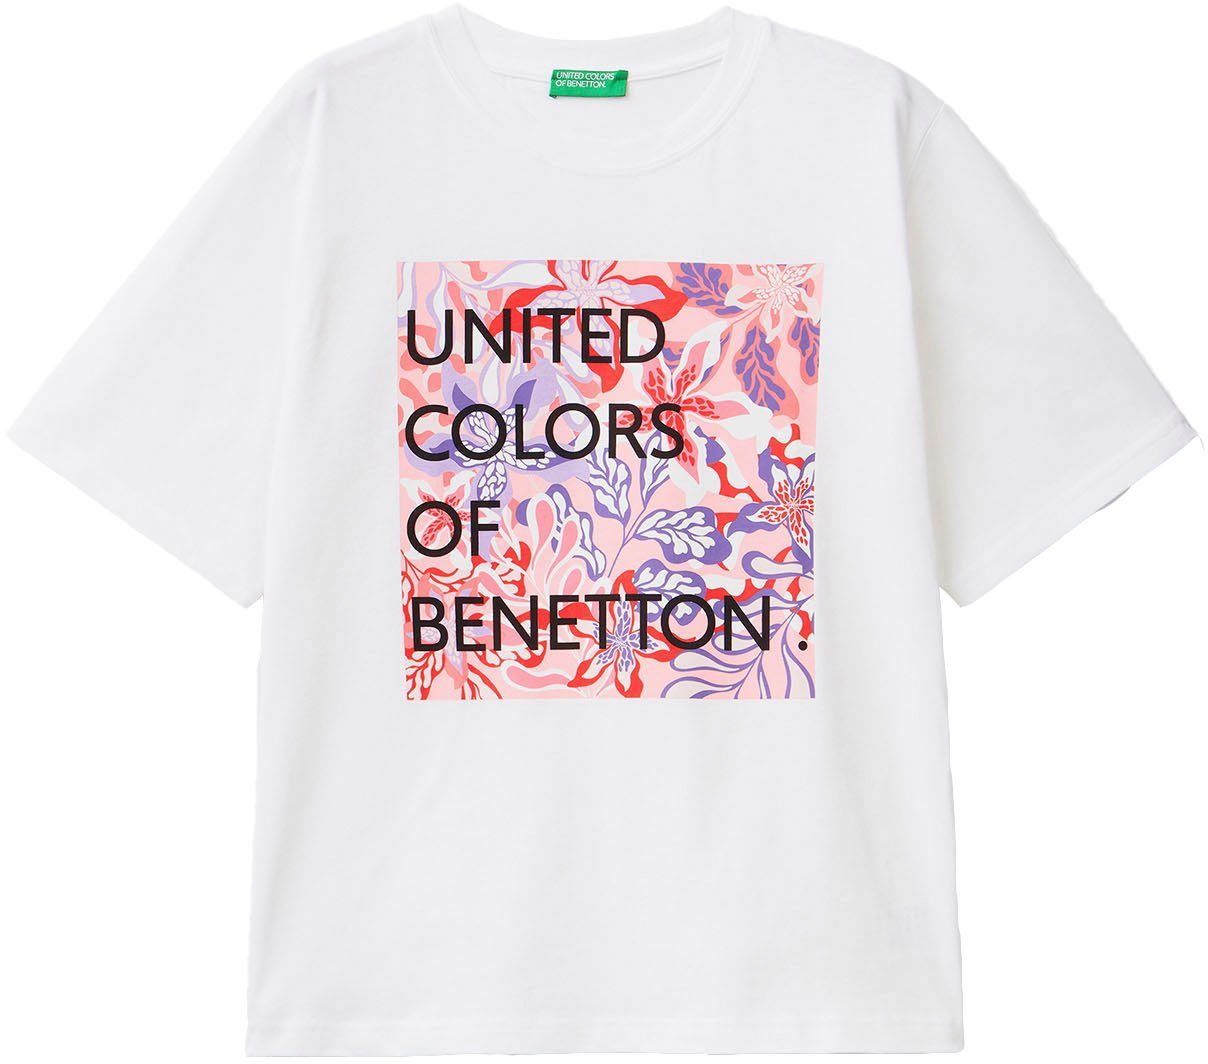 United Colors of Benetton T-Shirt weiß pink mit